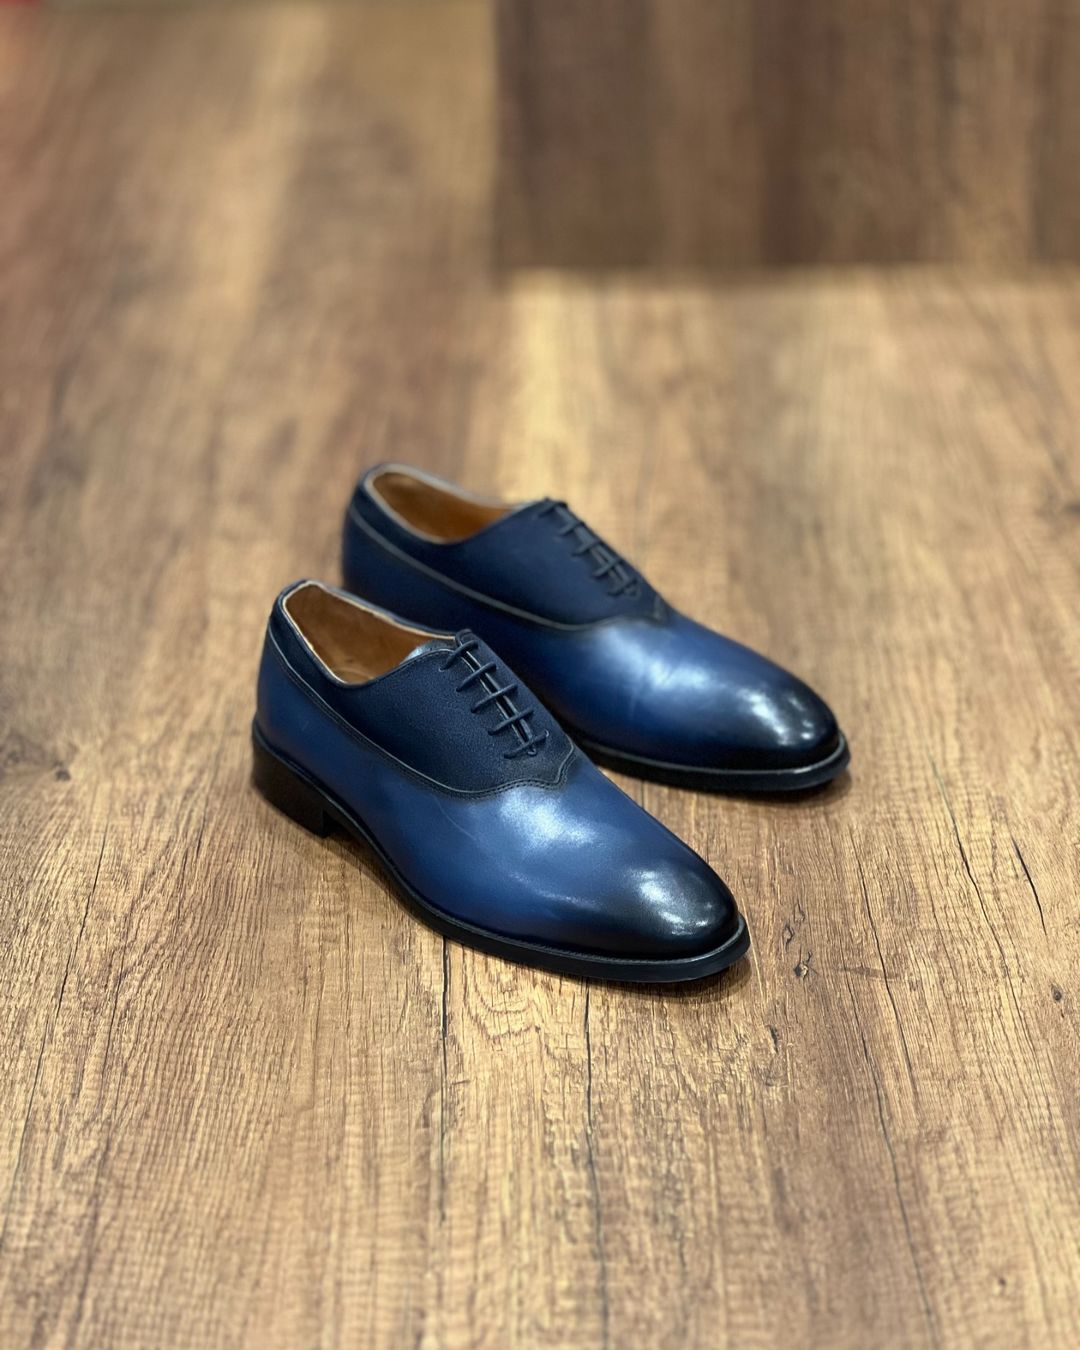 Men's Loafers & Slip-Ons Brogue Dress Shoes